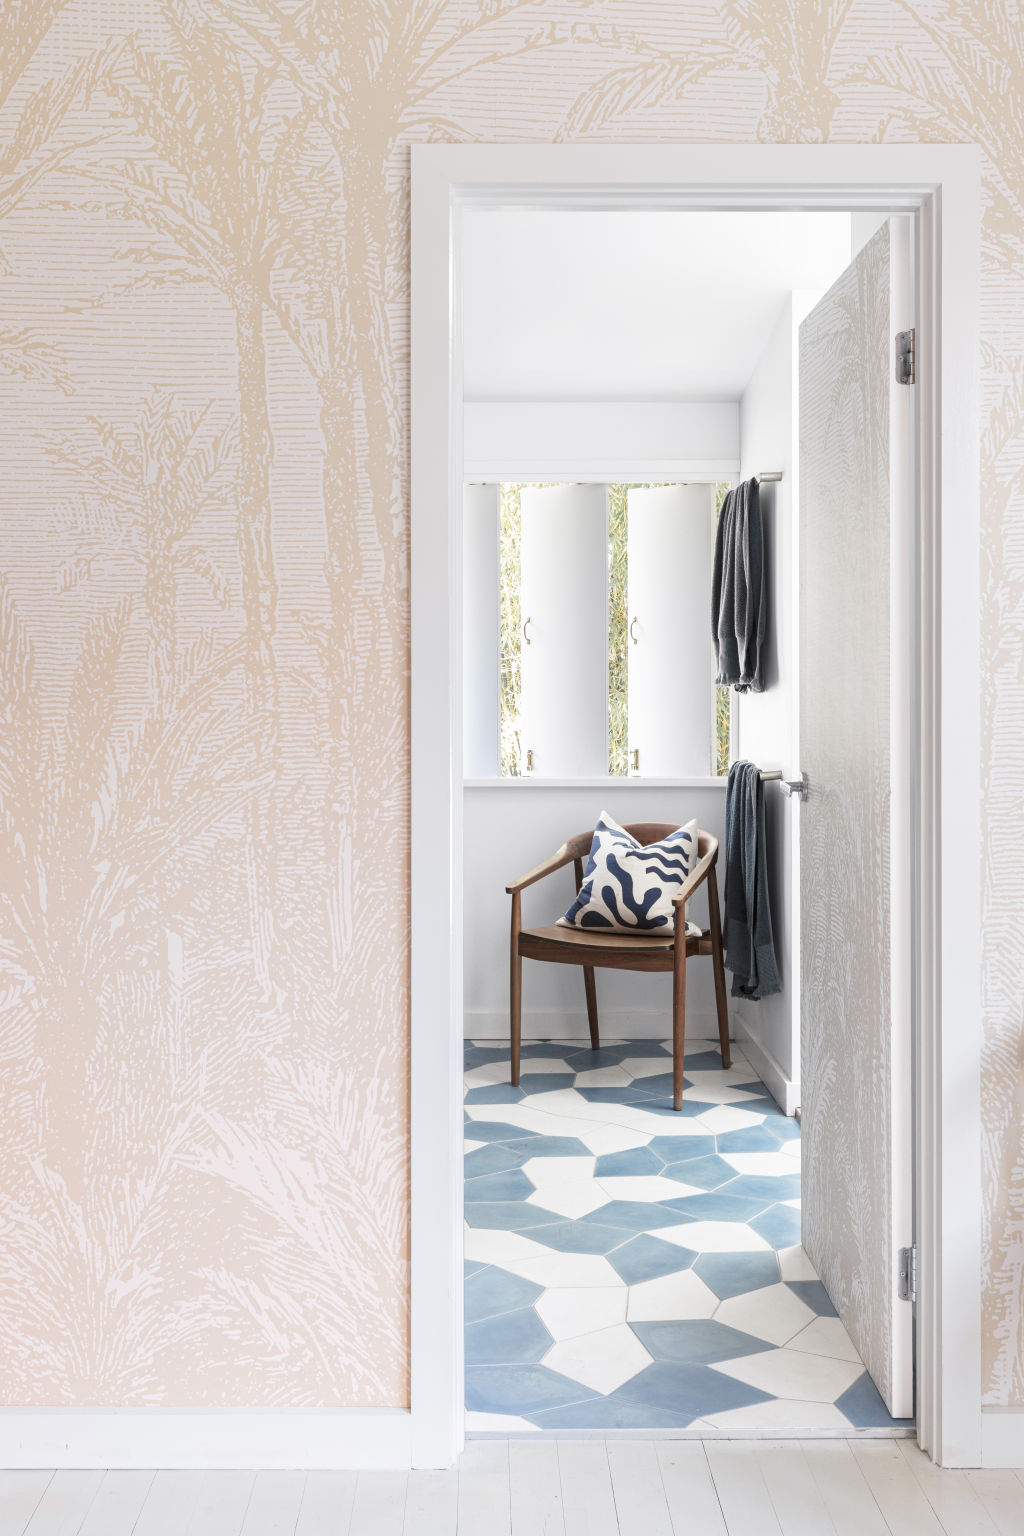 Brisbane designer Aude Charmetant loves matching tiles with colourful walls and adding prints where you may not expect them. Photo: Tari Peterson